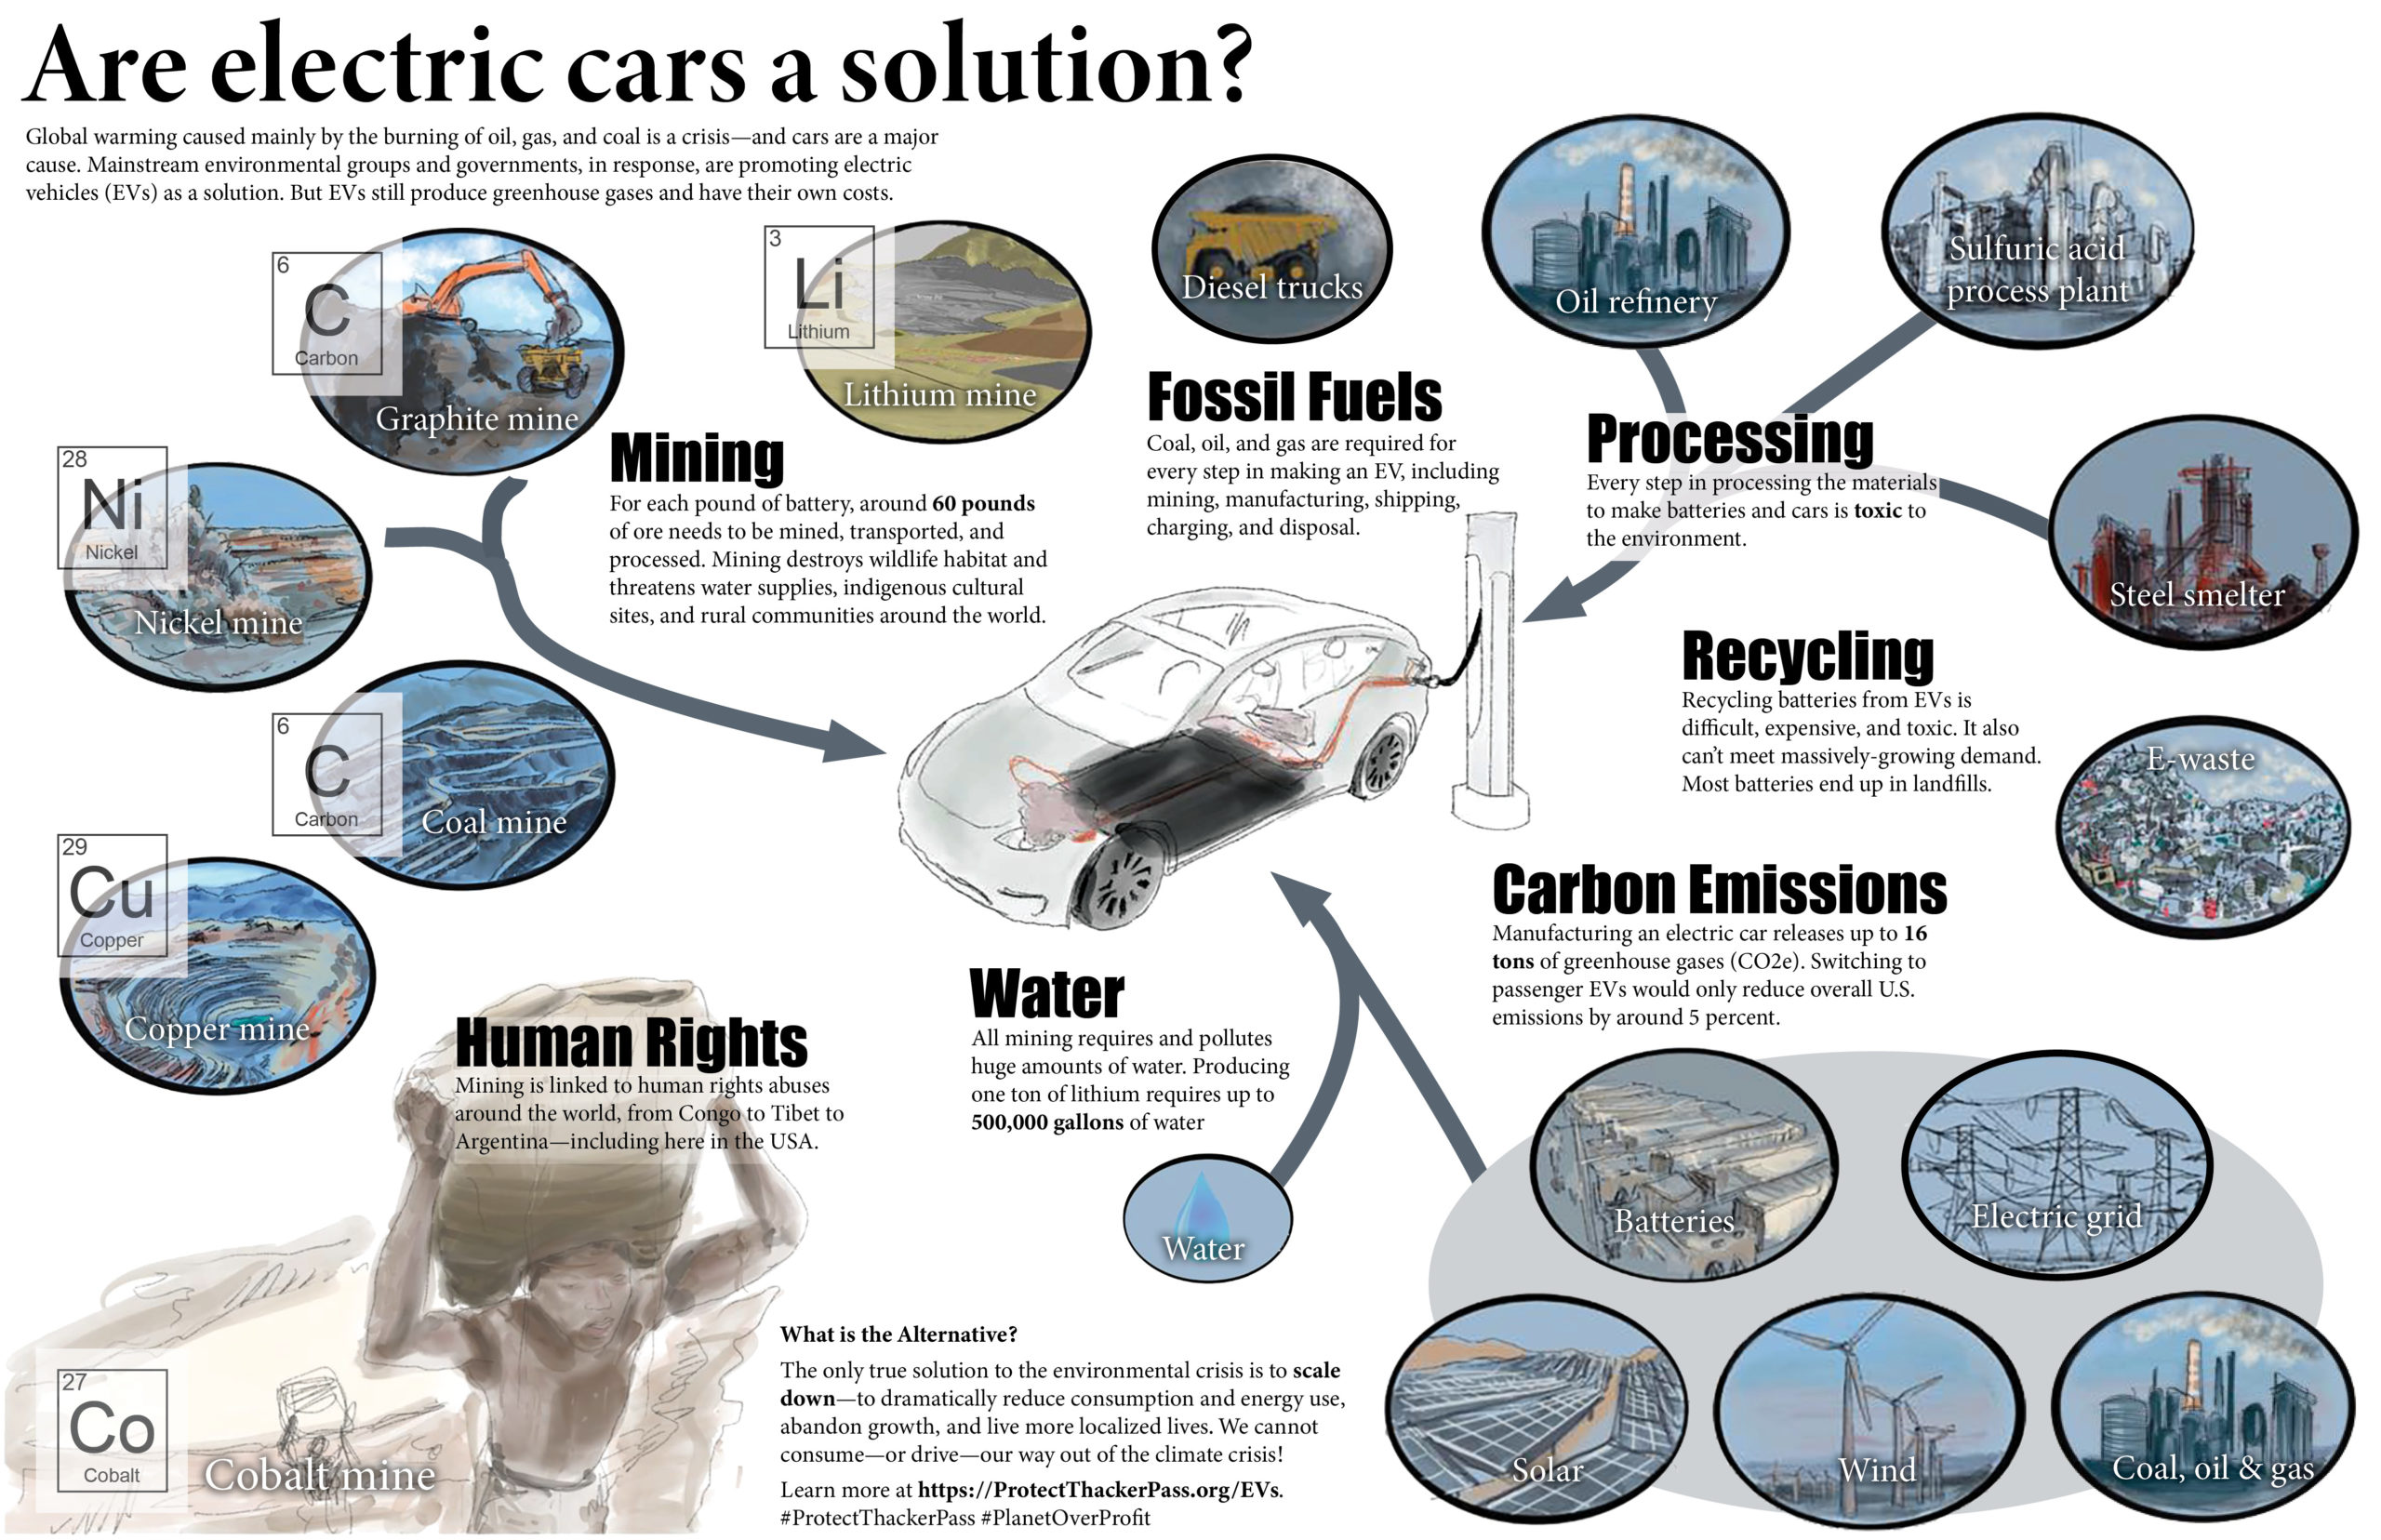 Are Electric Cars a Solution?